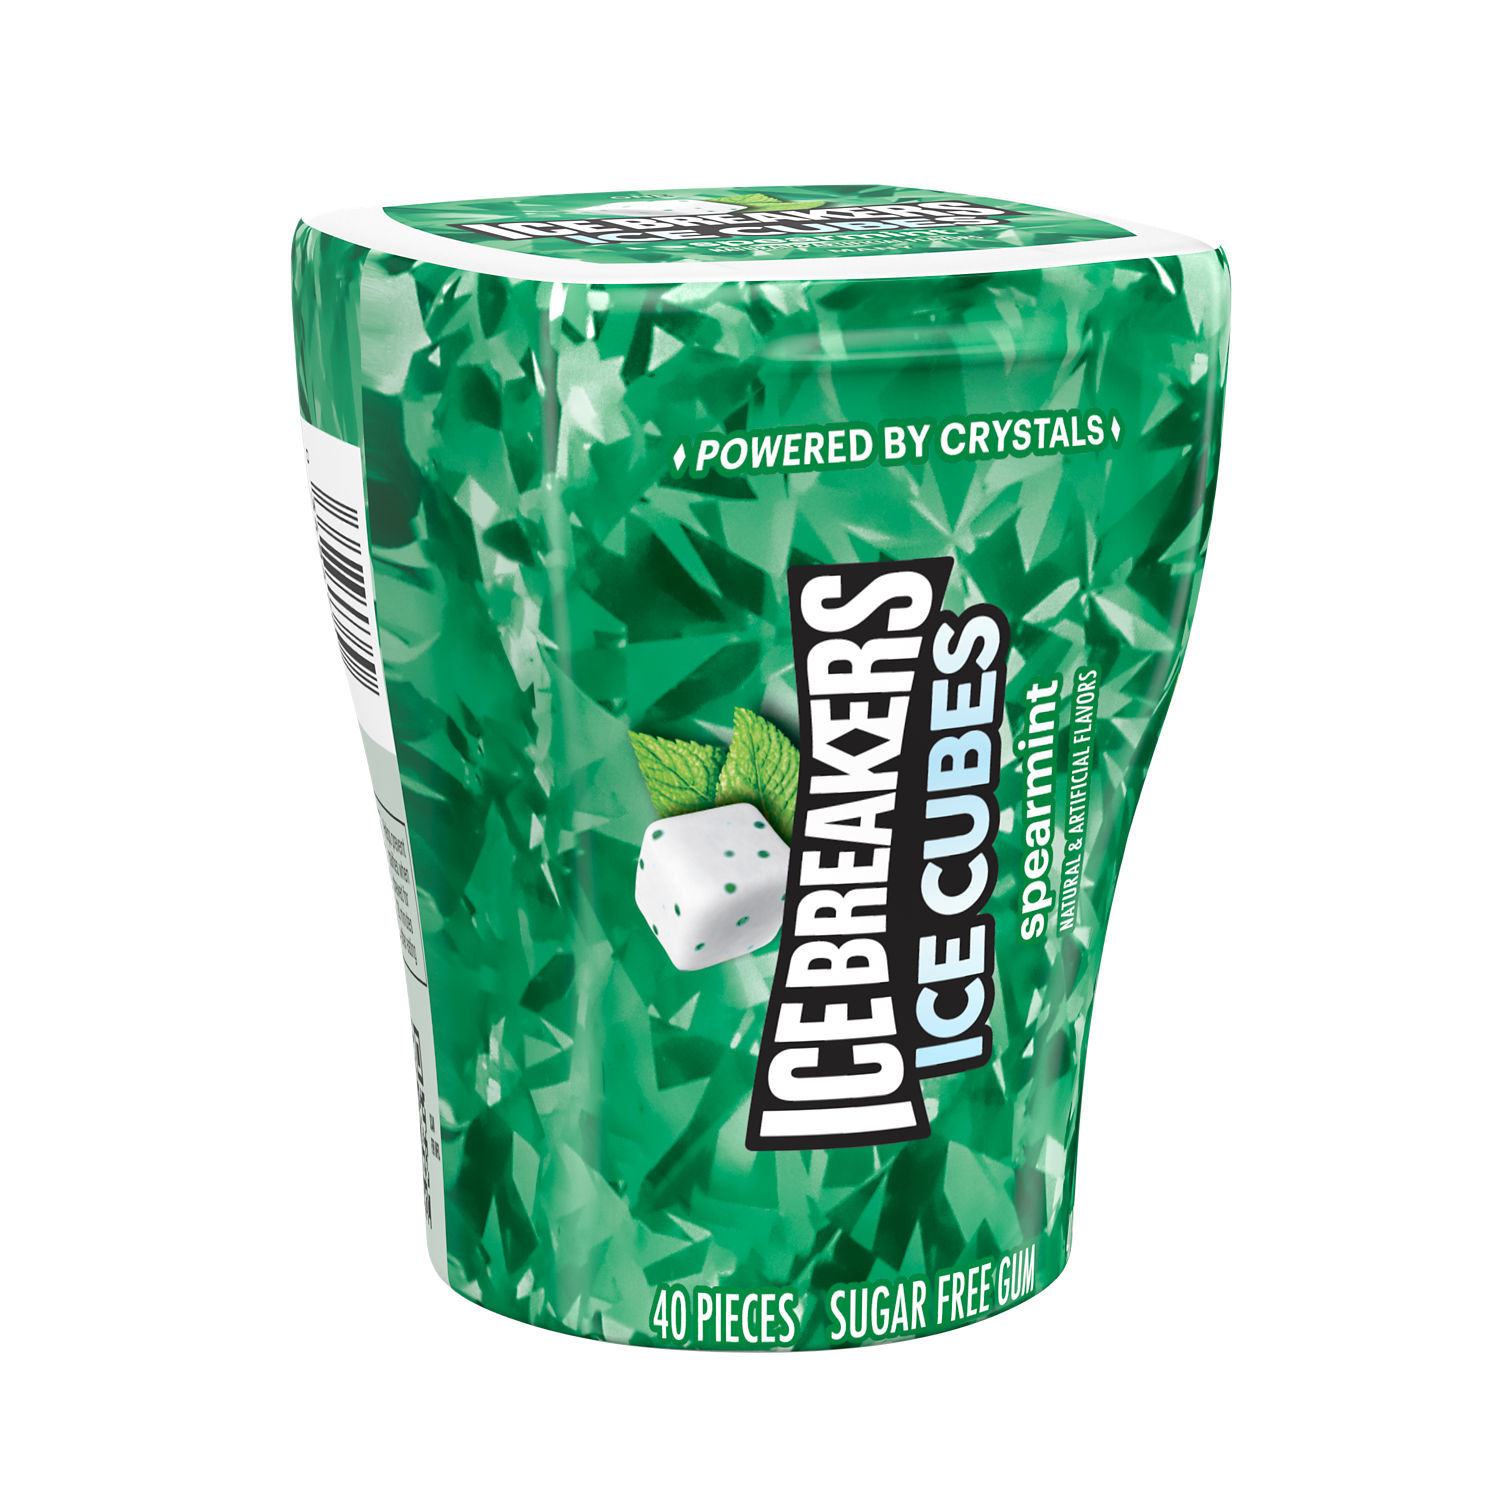 Ice Breakers Ice Cubes Spearmint Sugar Free Chewing Gum, Bottle 3.24 oz, 40 Pieces - image 1 of 8